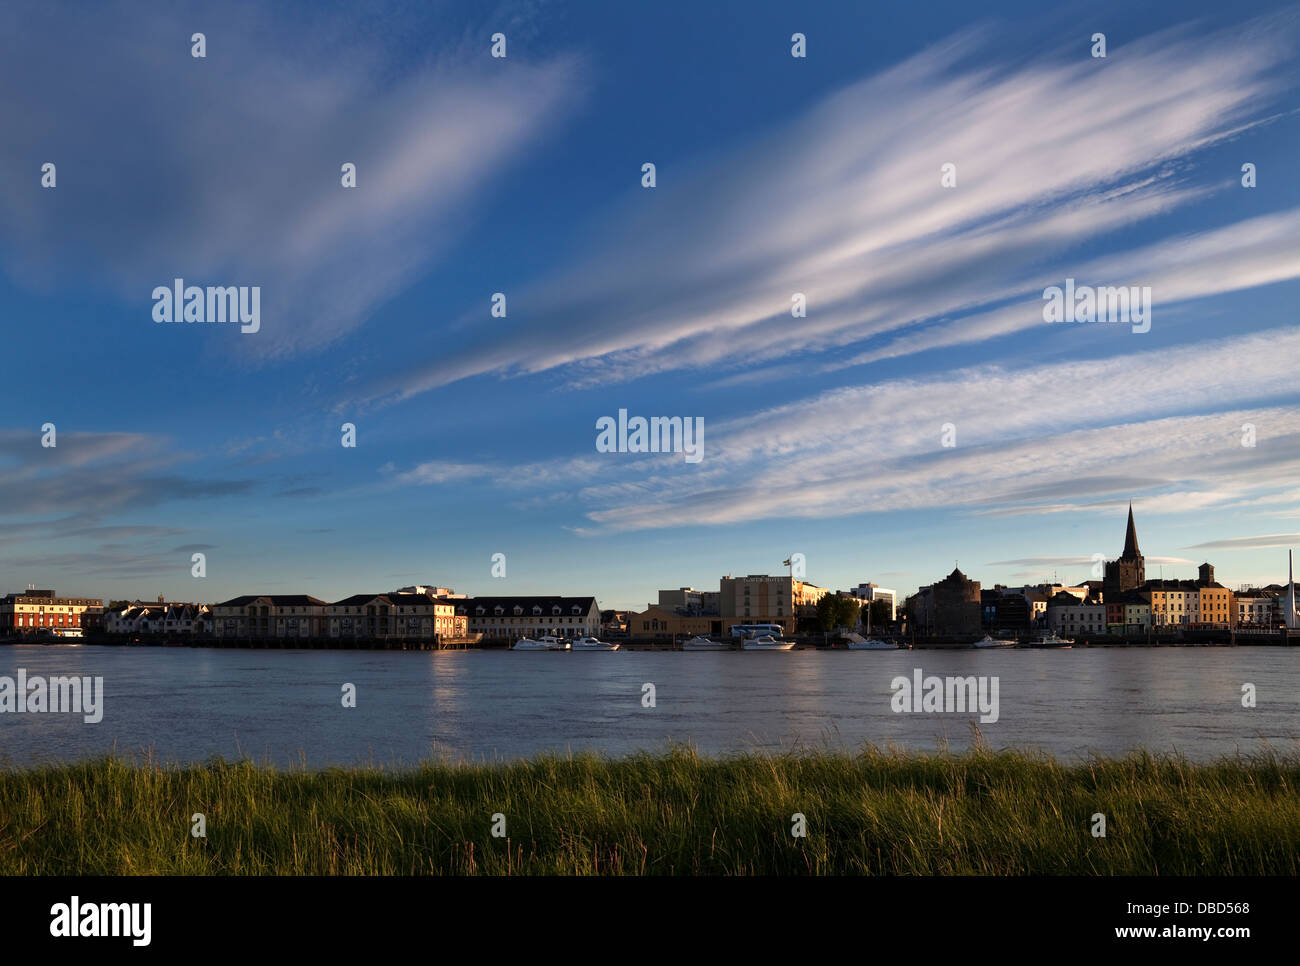 Waterford City as seen from the opposite bank of the River Suir, County Waterford, Ireland Stock Photo